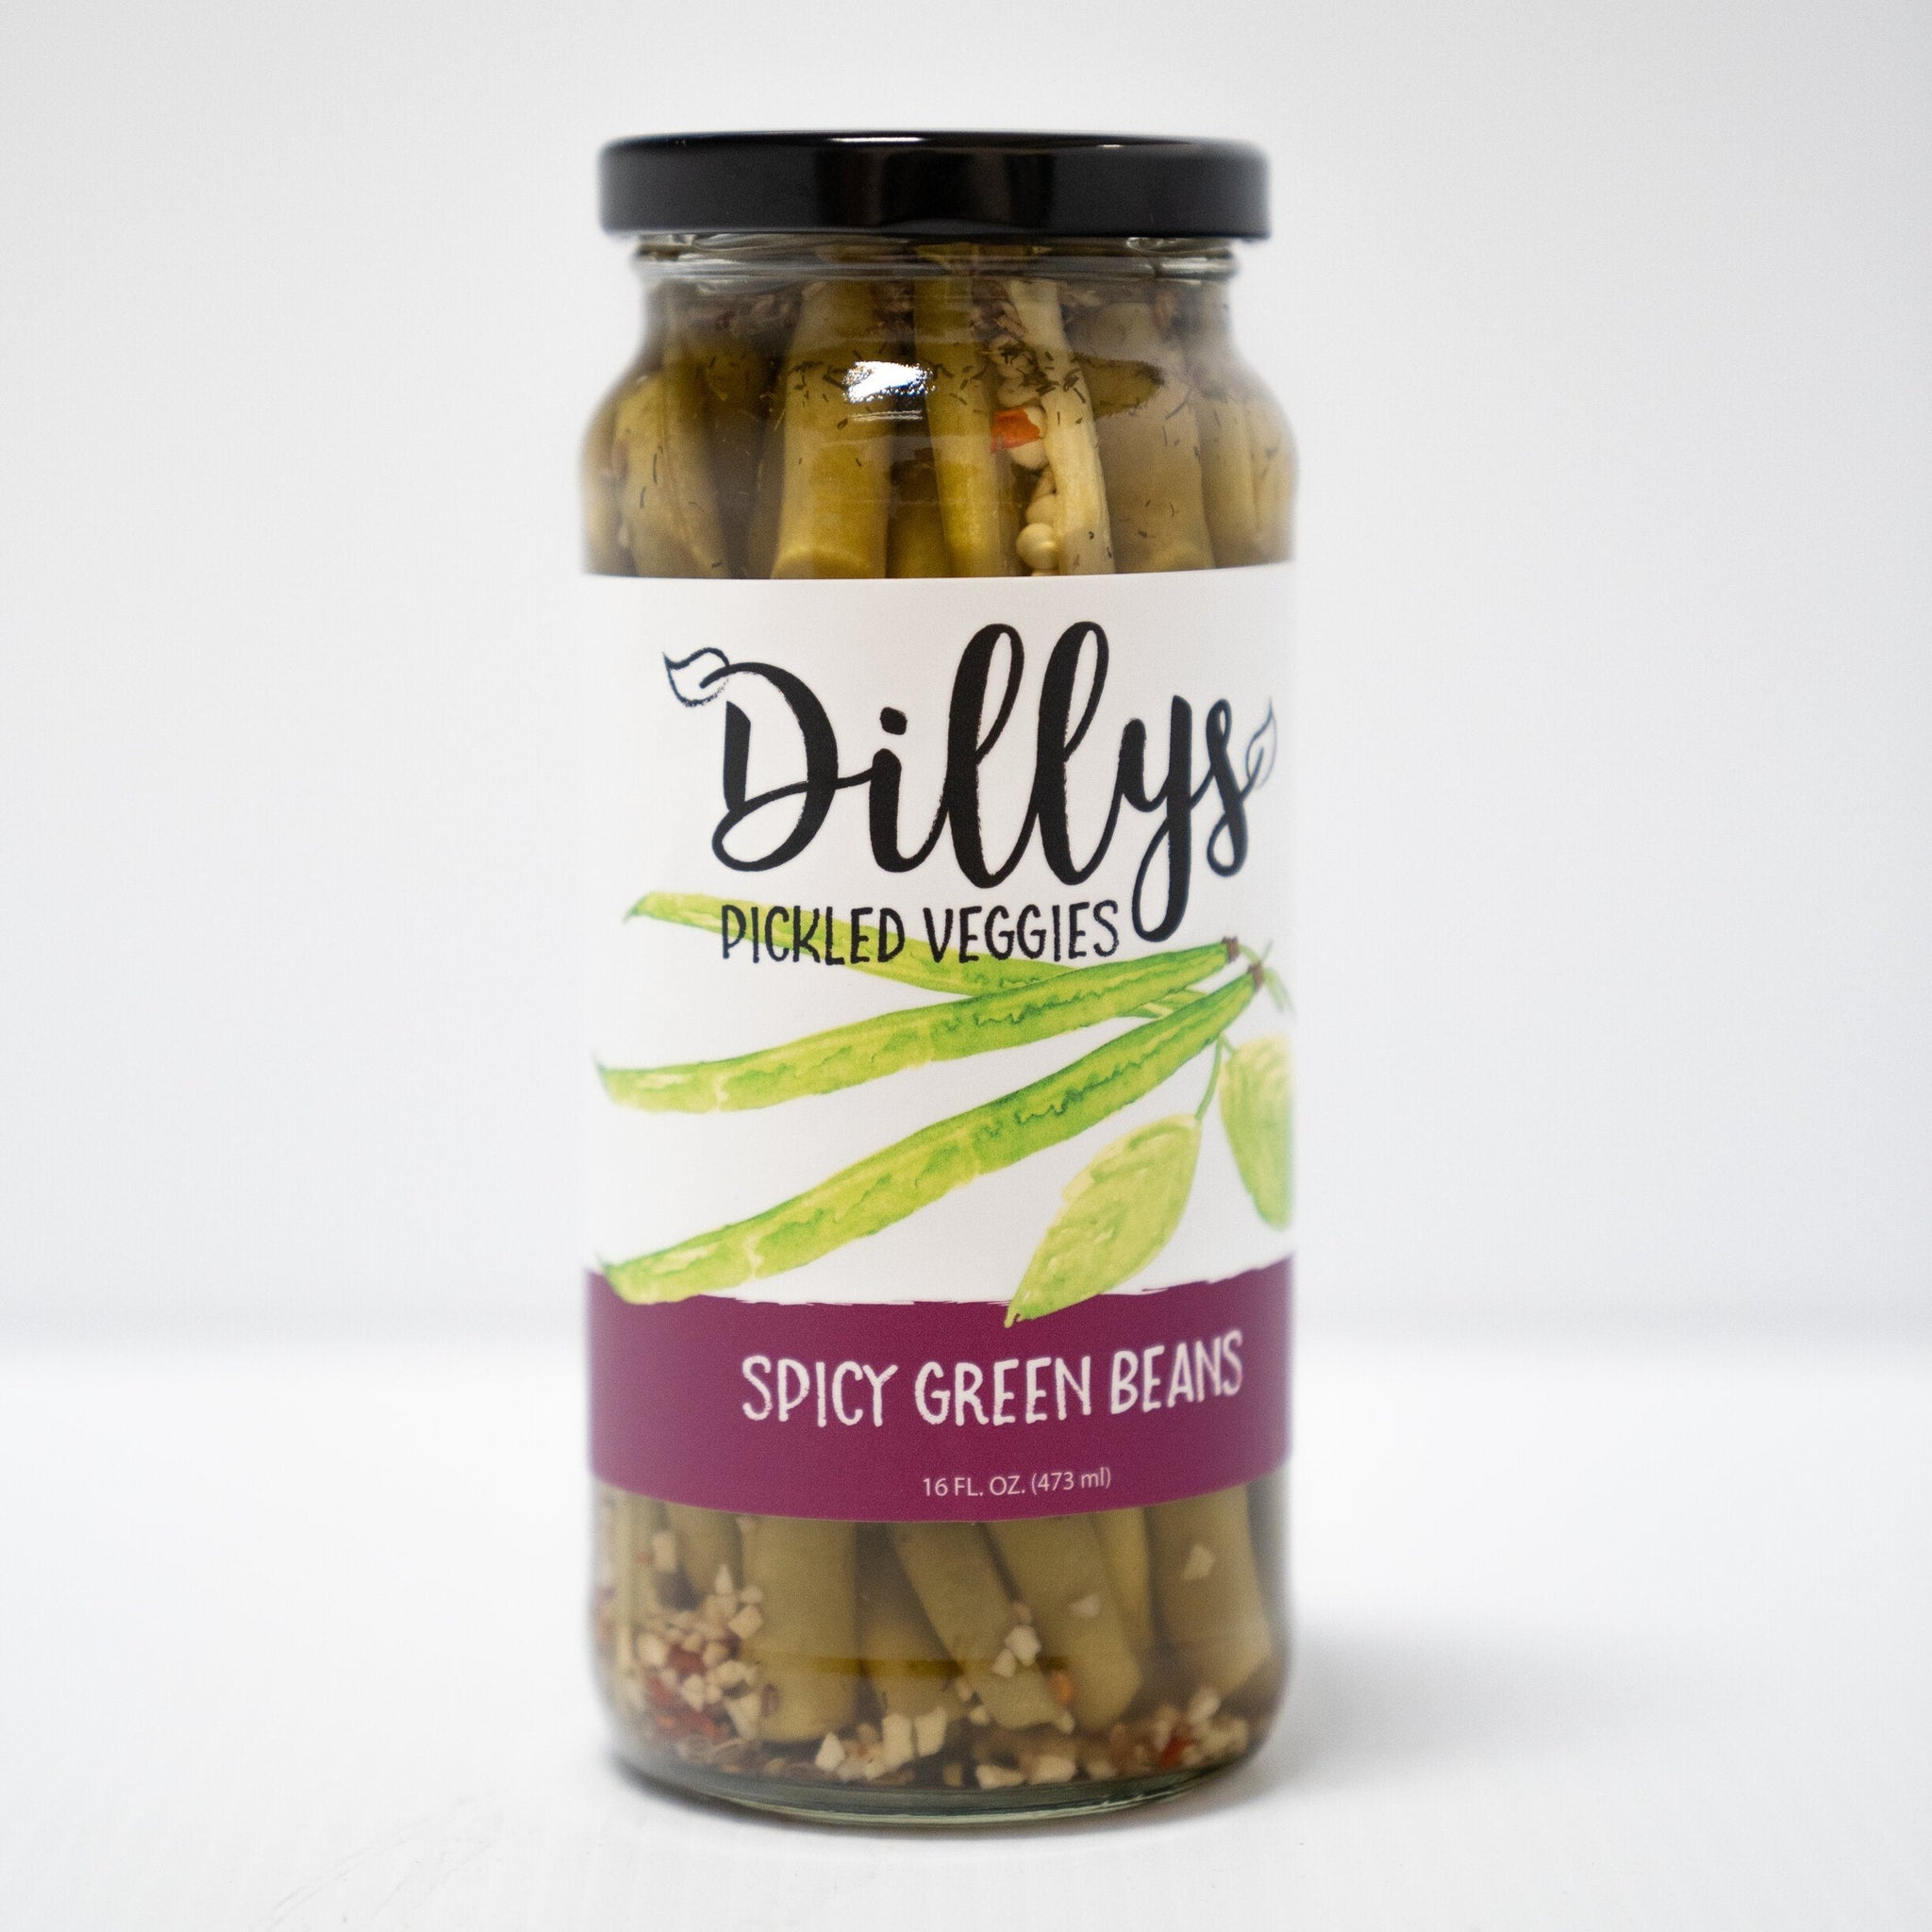 Dilly's Spicy green beans